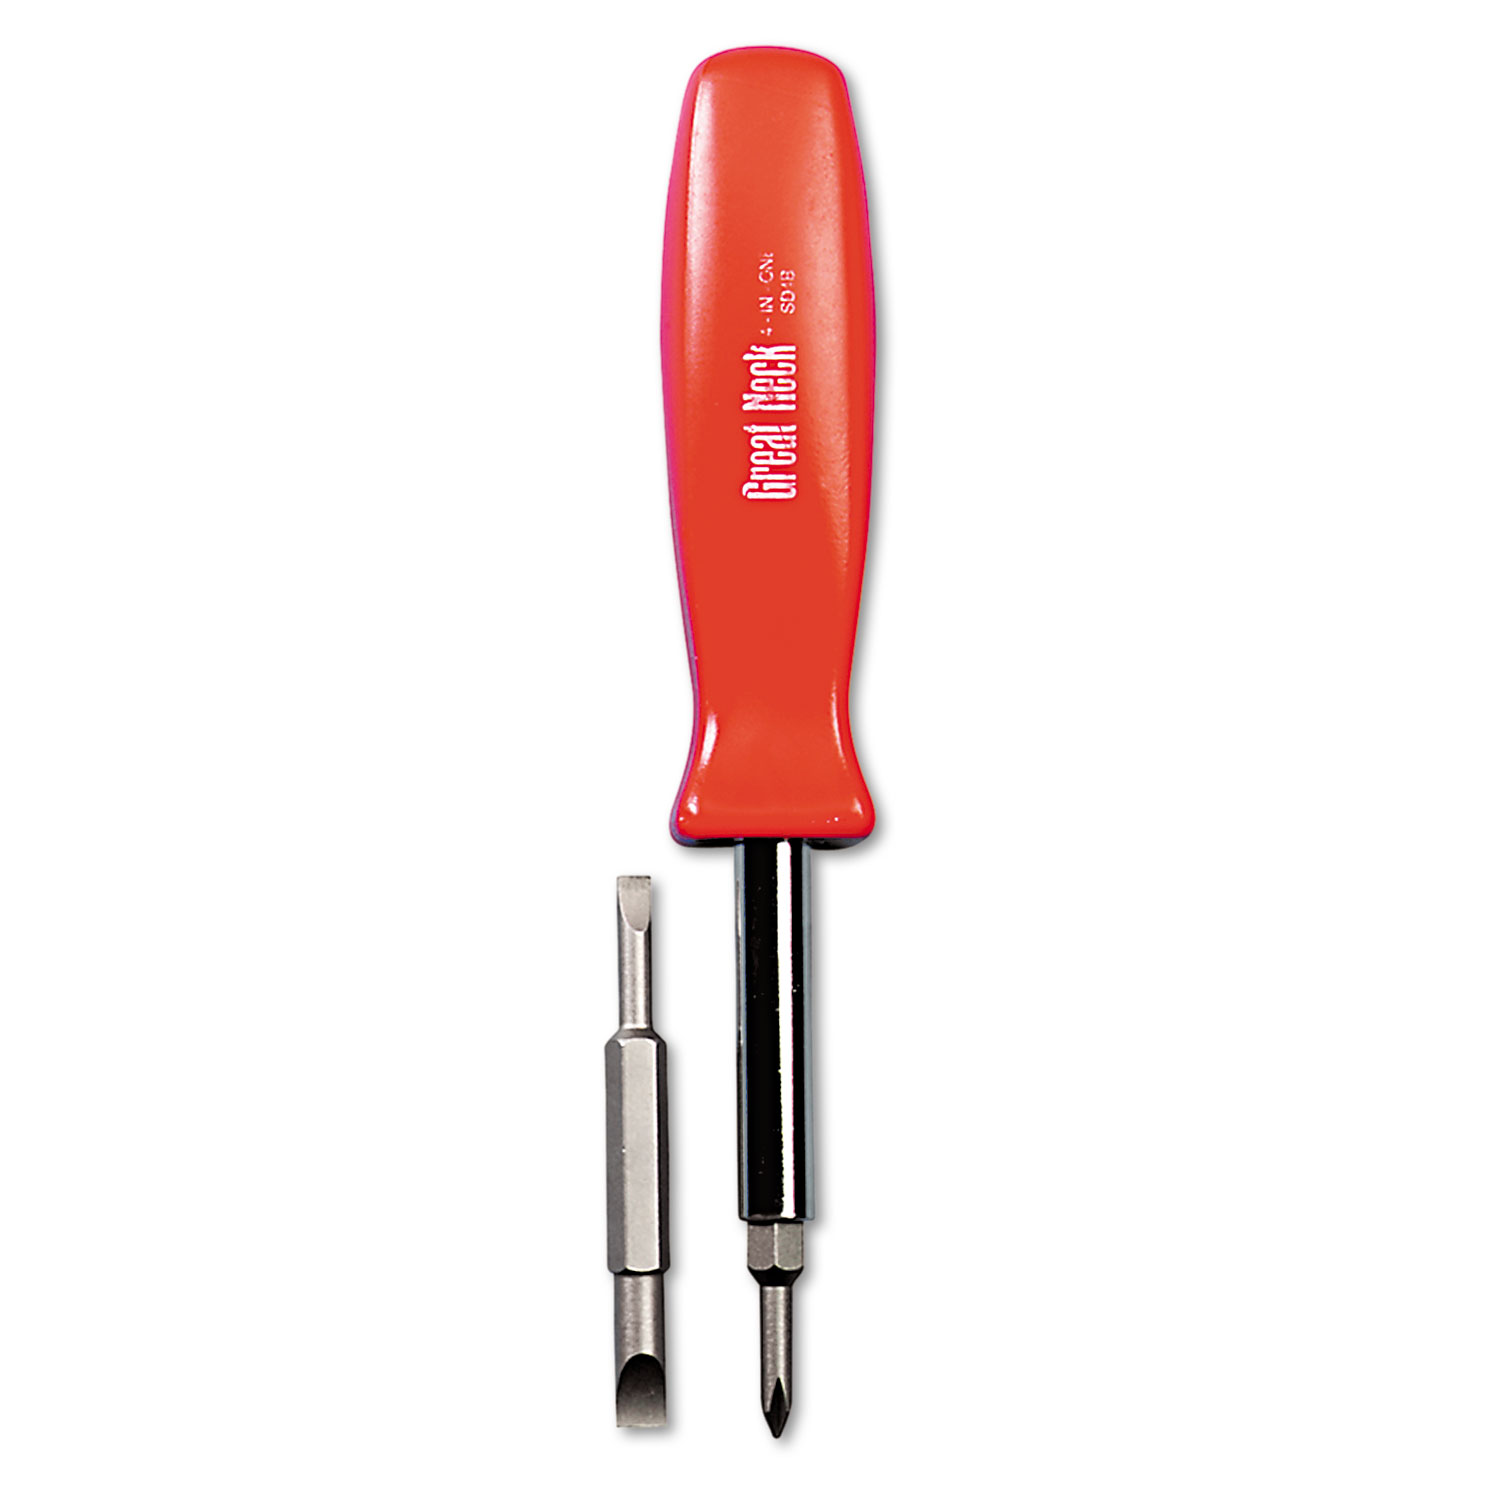  Great Neck SD4BC 4 in-1 Screwdriver w/Interchangeable Phillips/Standard Bits, Assorted Colors (GNSSD4BC) 